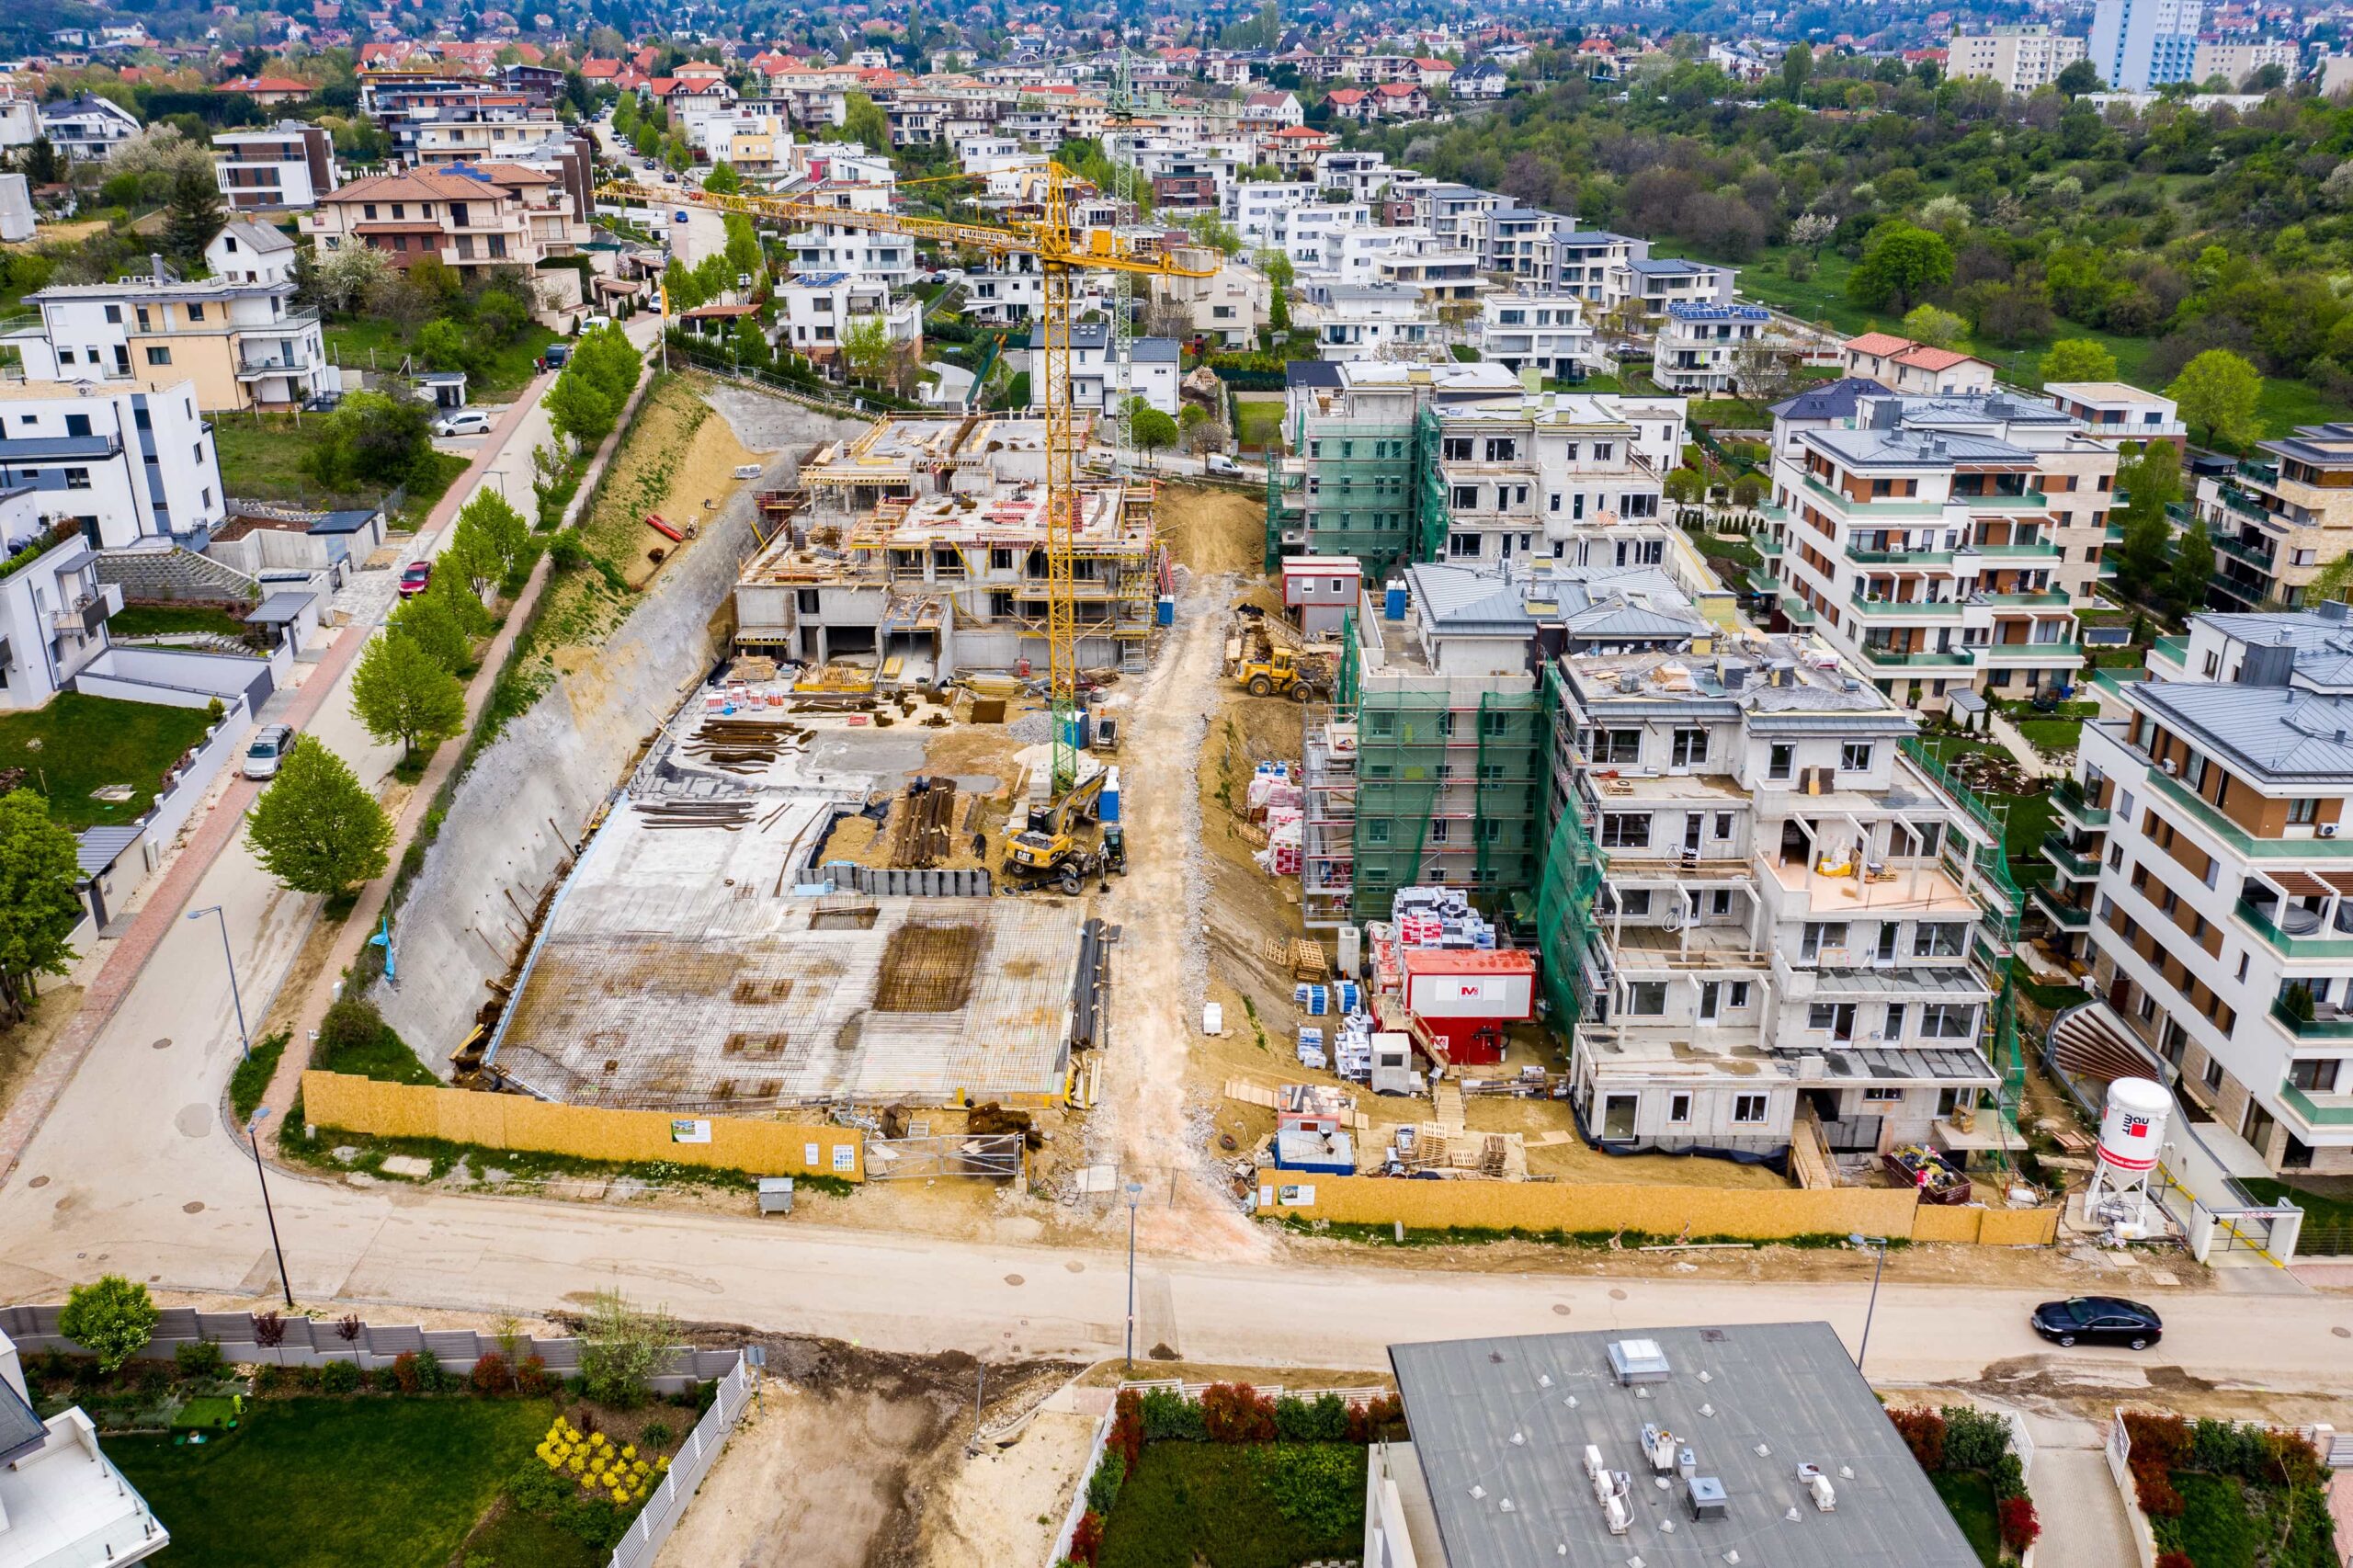 Terrace Residence 4th phase - April 2019